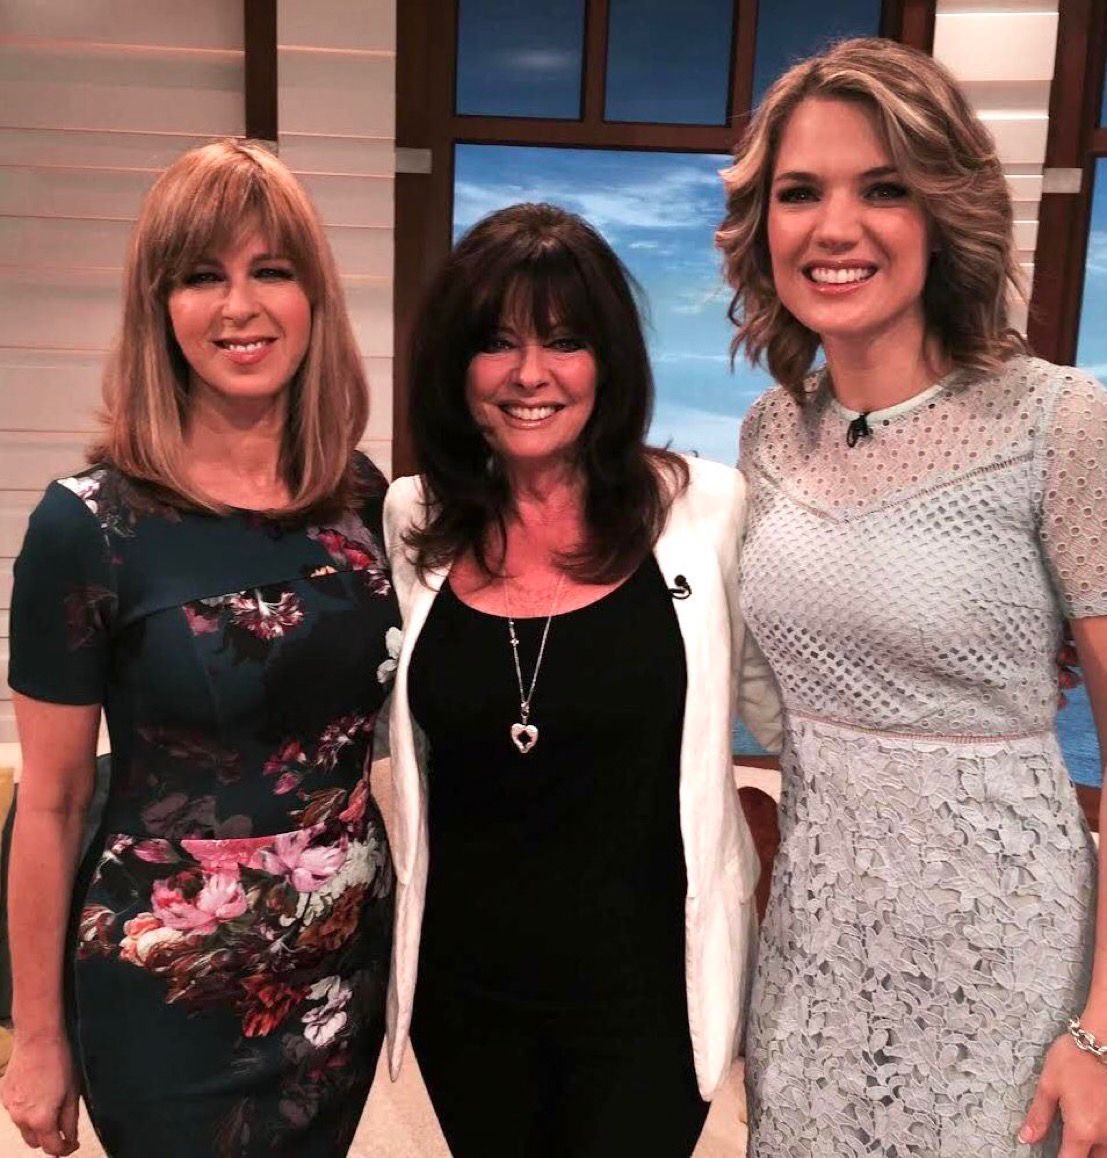 Happy Birthday Beautiful Charlotte Hawkins Great presenter and Lovely Lady. Fab memory with Kate Garraway when I was on GMB. Have a Brilliant Day @CharlotteHawkns @kategarraway @GMB @ClassicFM @itvracing @mndassoc @ellenorcharity @bbcstrictly #ThursdayThoughts